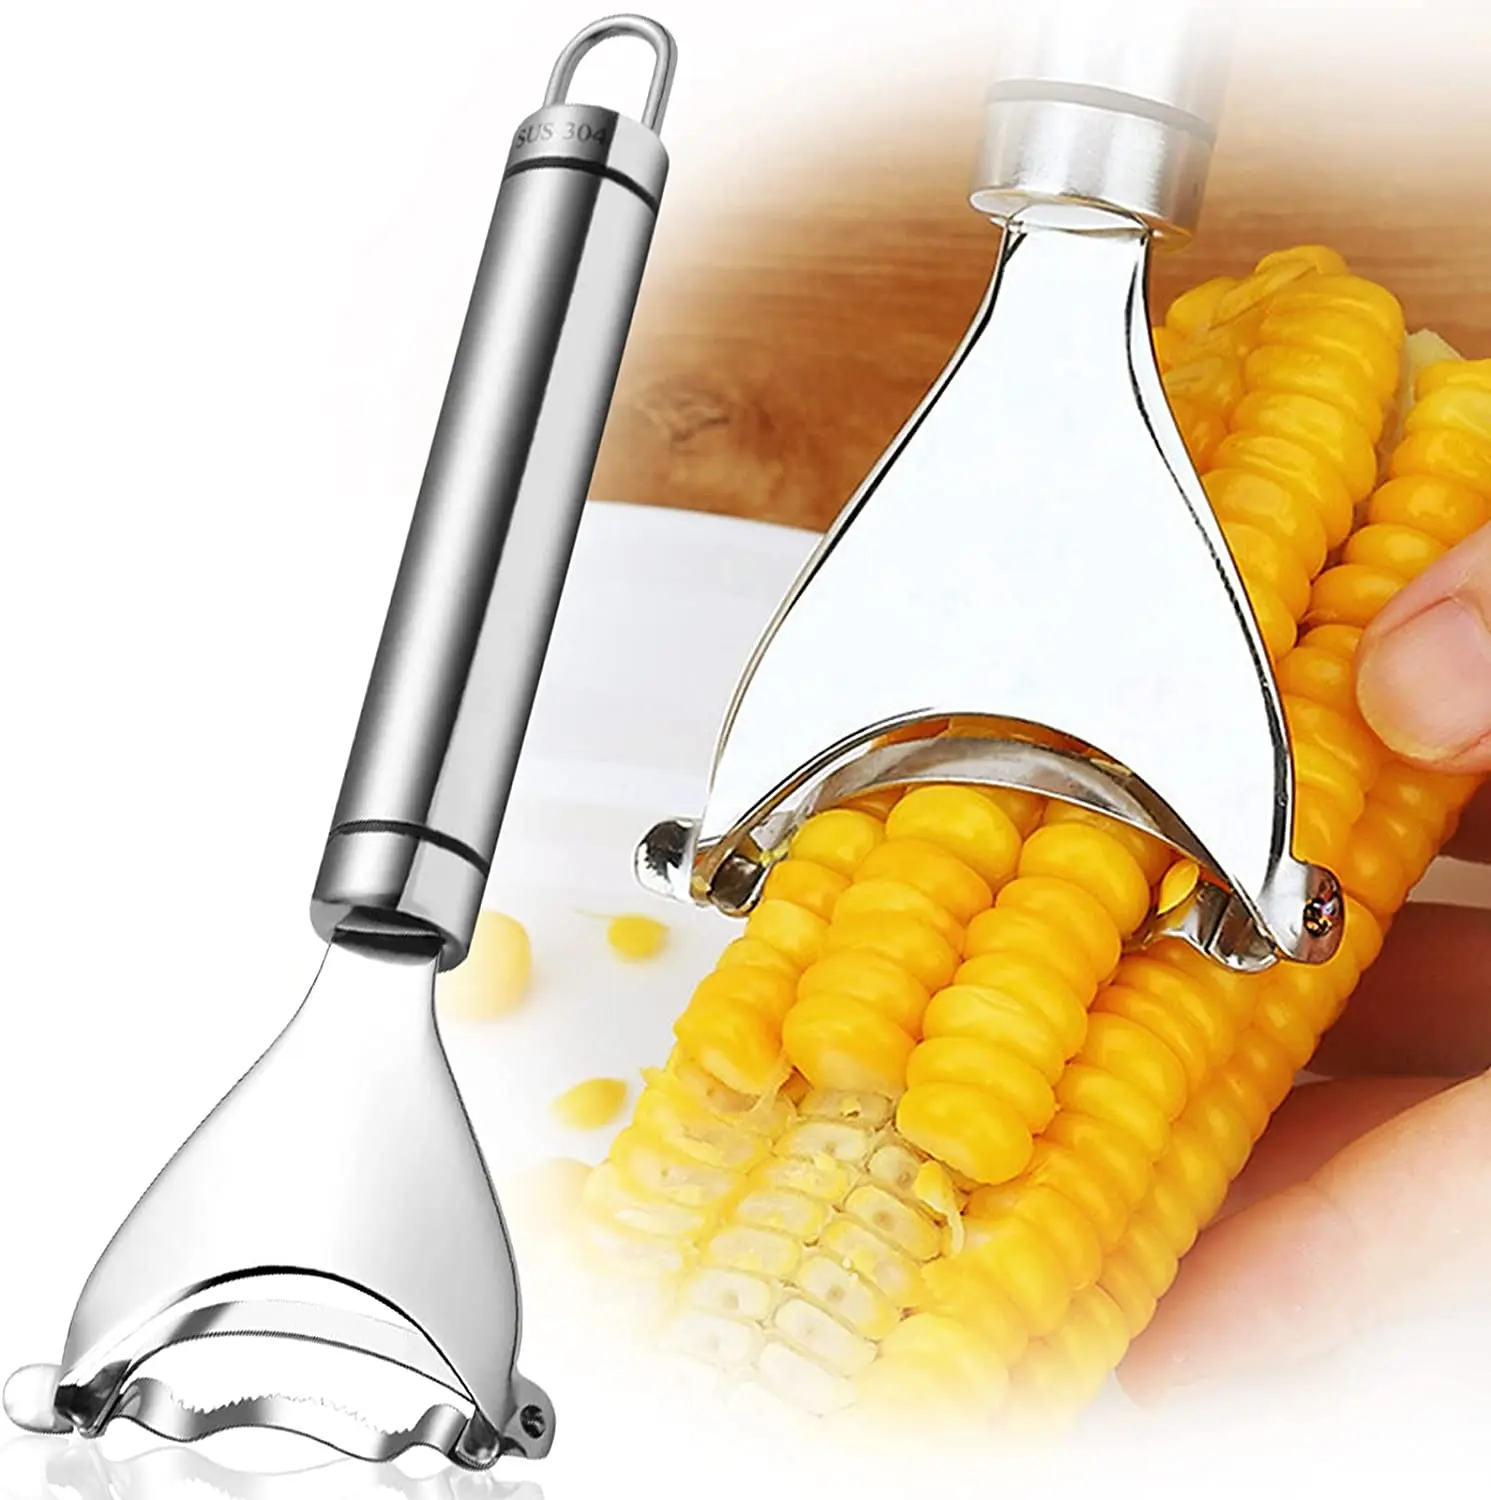 High Quality Stainless Steel Corn Peeler Magic Corn Cob Stripper Cob  Remover Tool With Ergonomic Handle - Buy Corn Peeler,Corn Cob Stripper,Corn  Stripper Product on Alibaba.com